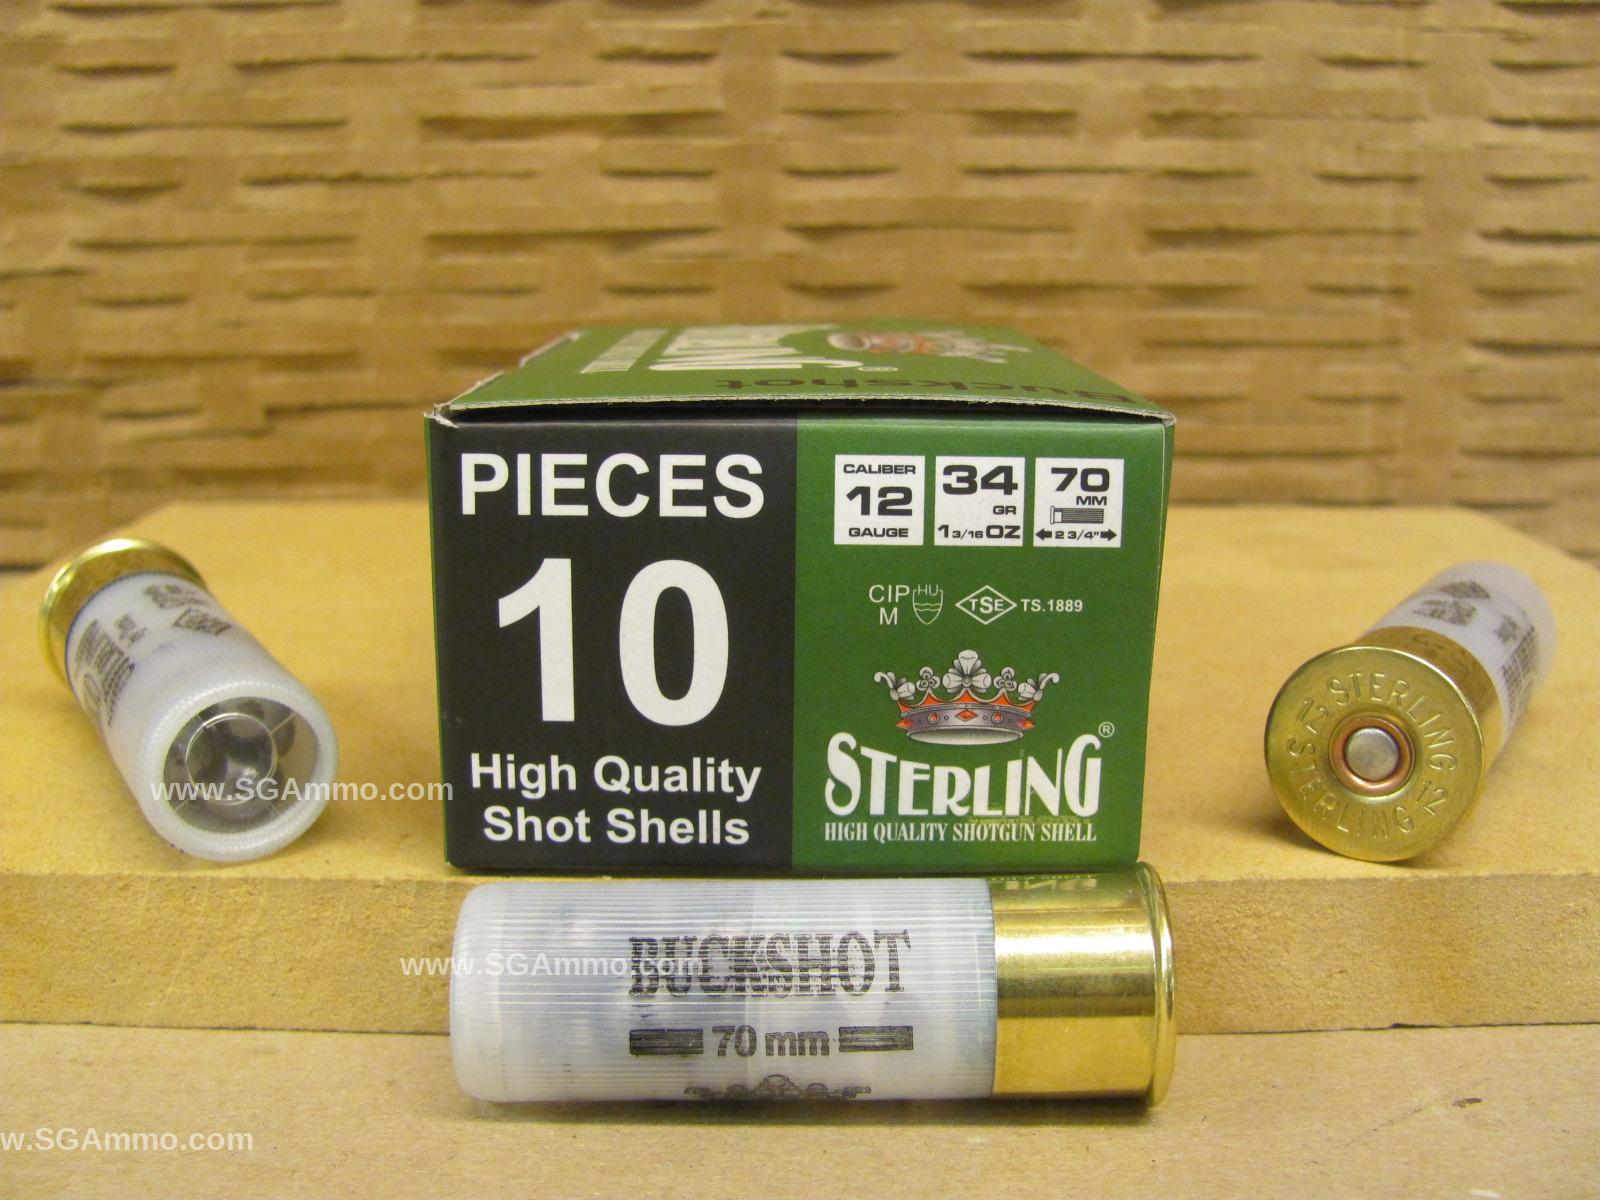 200 Round Can - 12 Gauge 2-3/4 Inch 9 Pellet 00 Buckshot Ammo Made by Sterling in Turkey in Used Military M2A1 or M2A2 Metal Canister